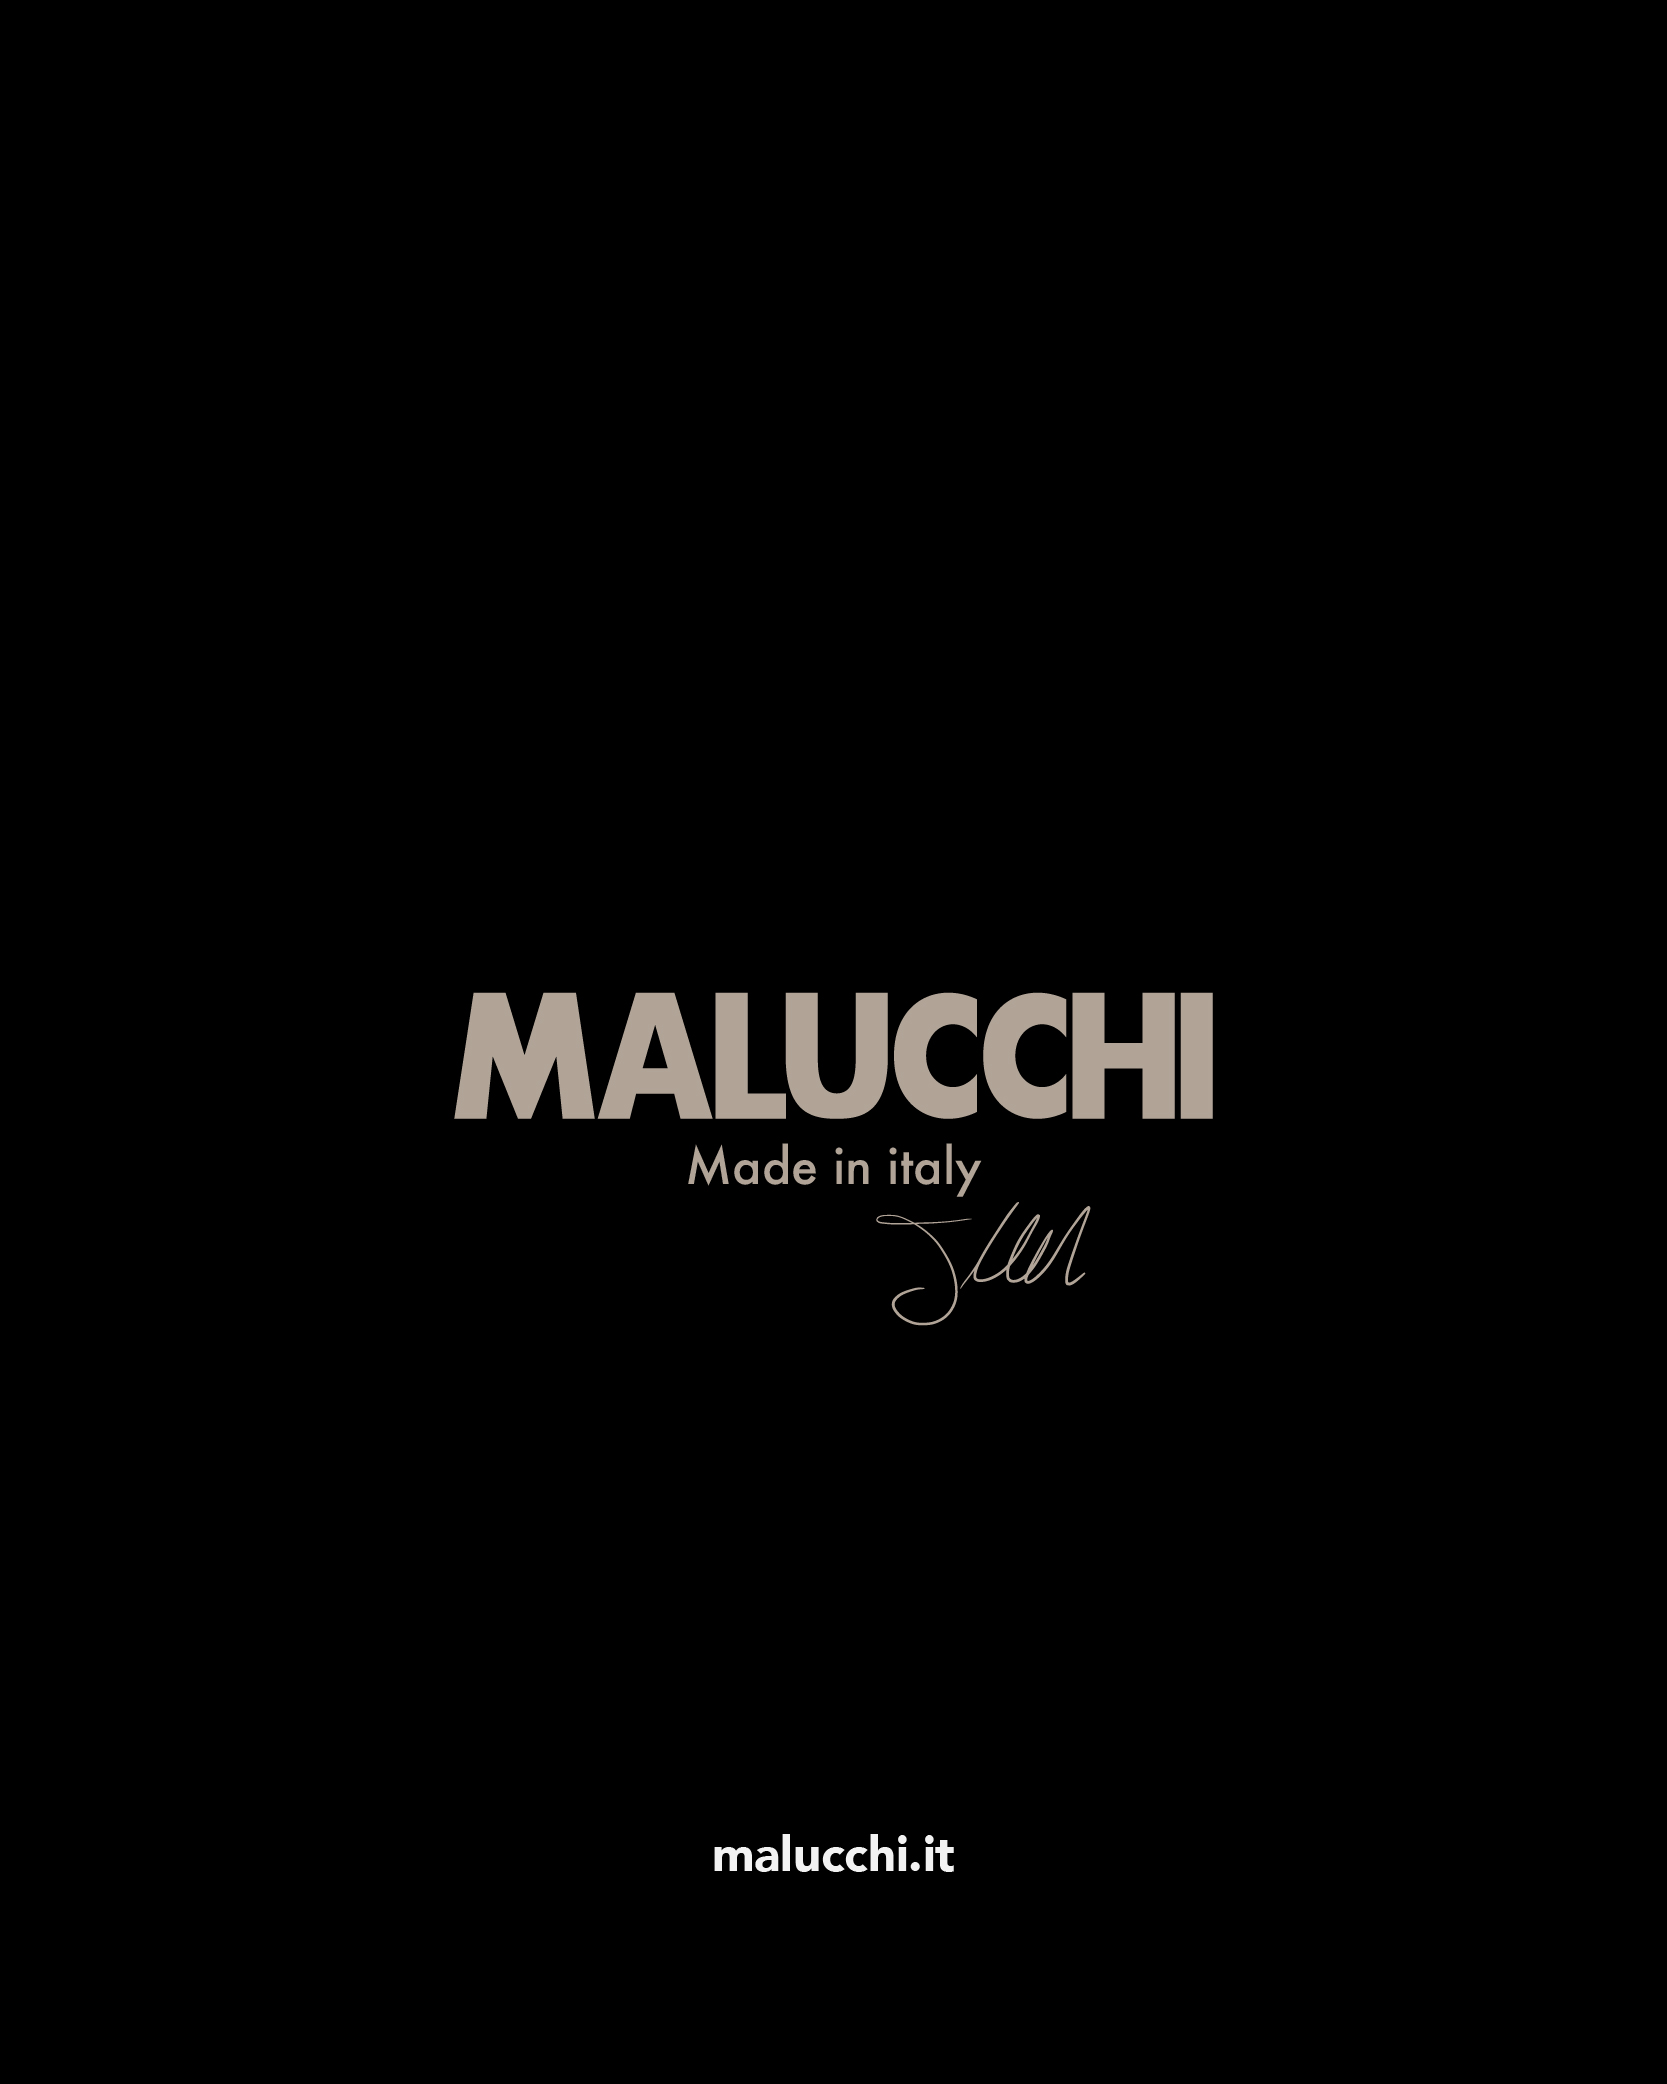 Malucchi Made in Italy